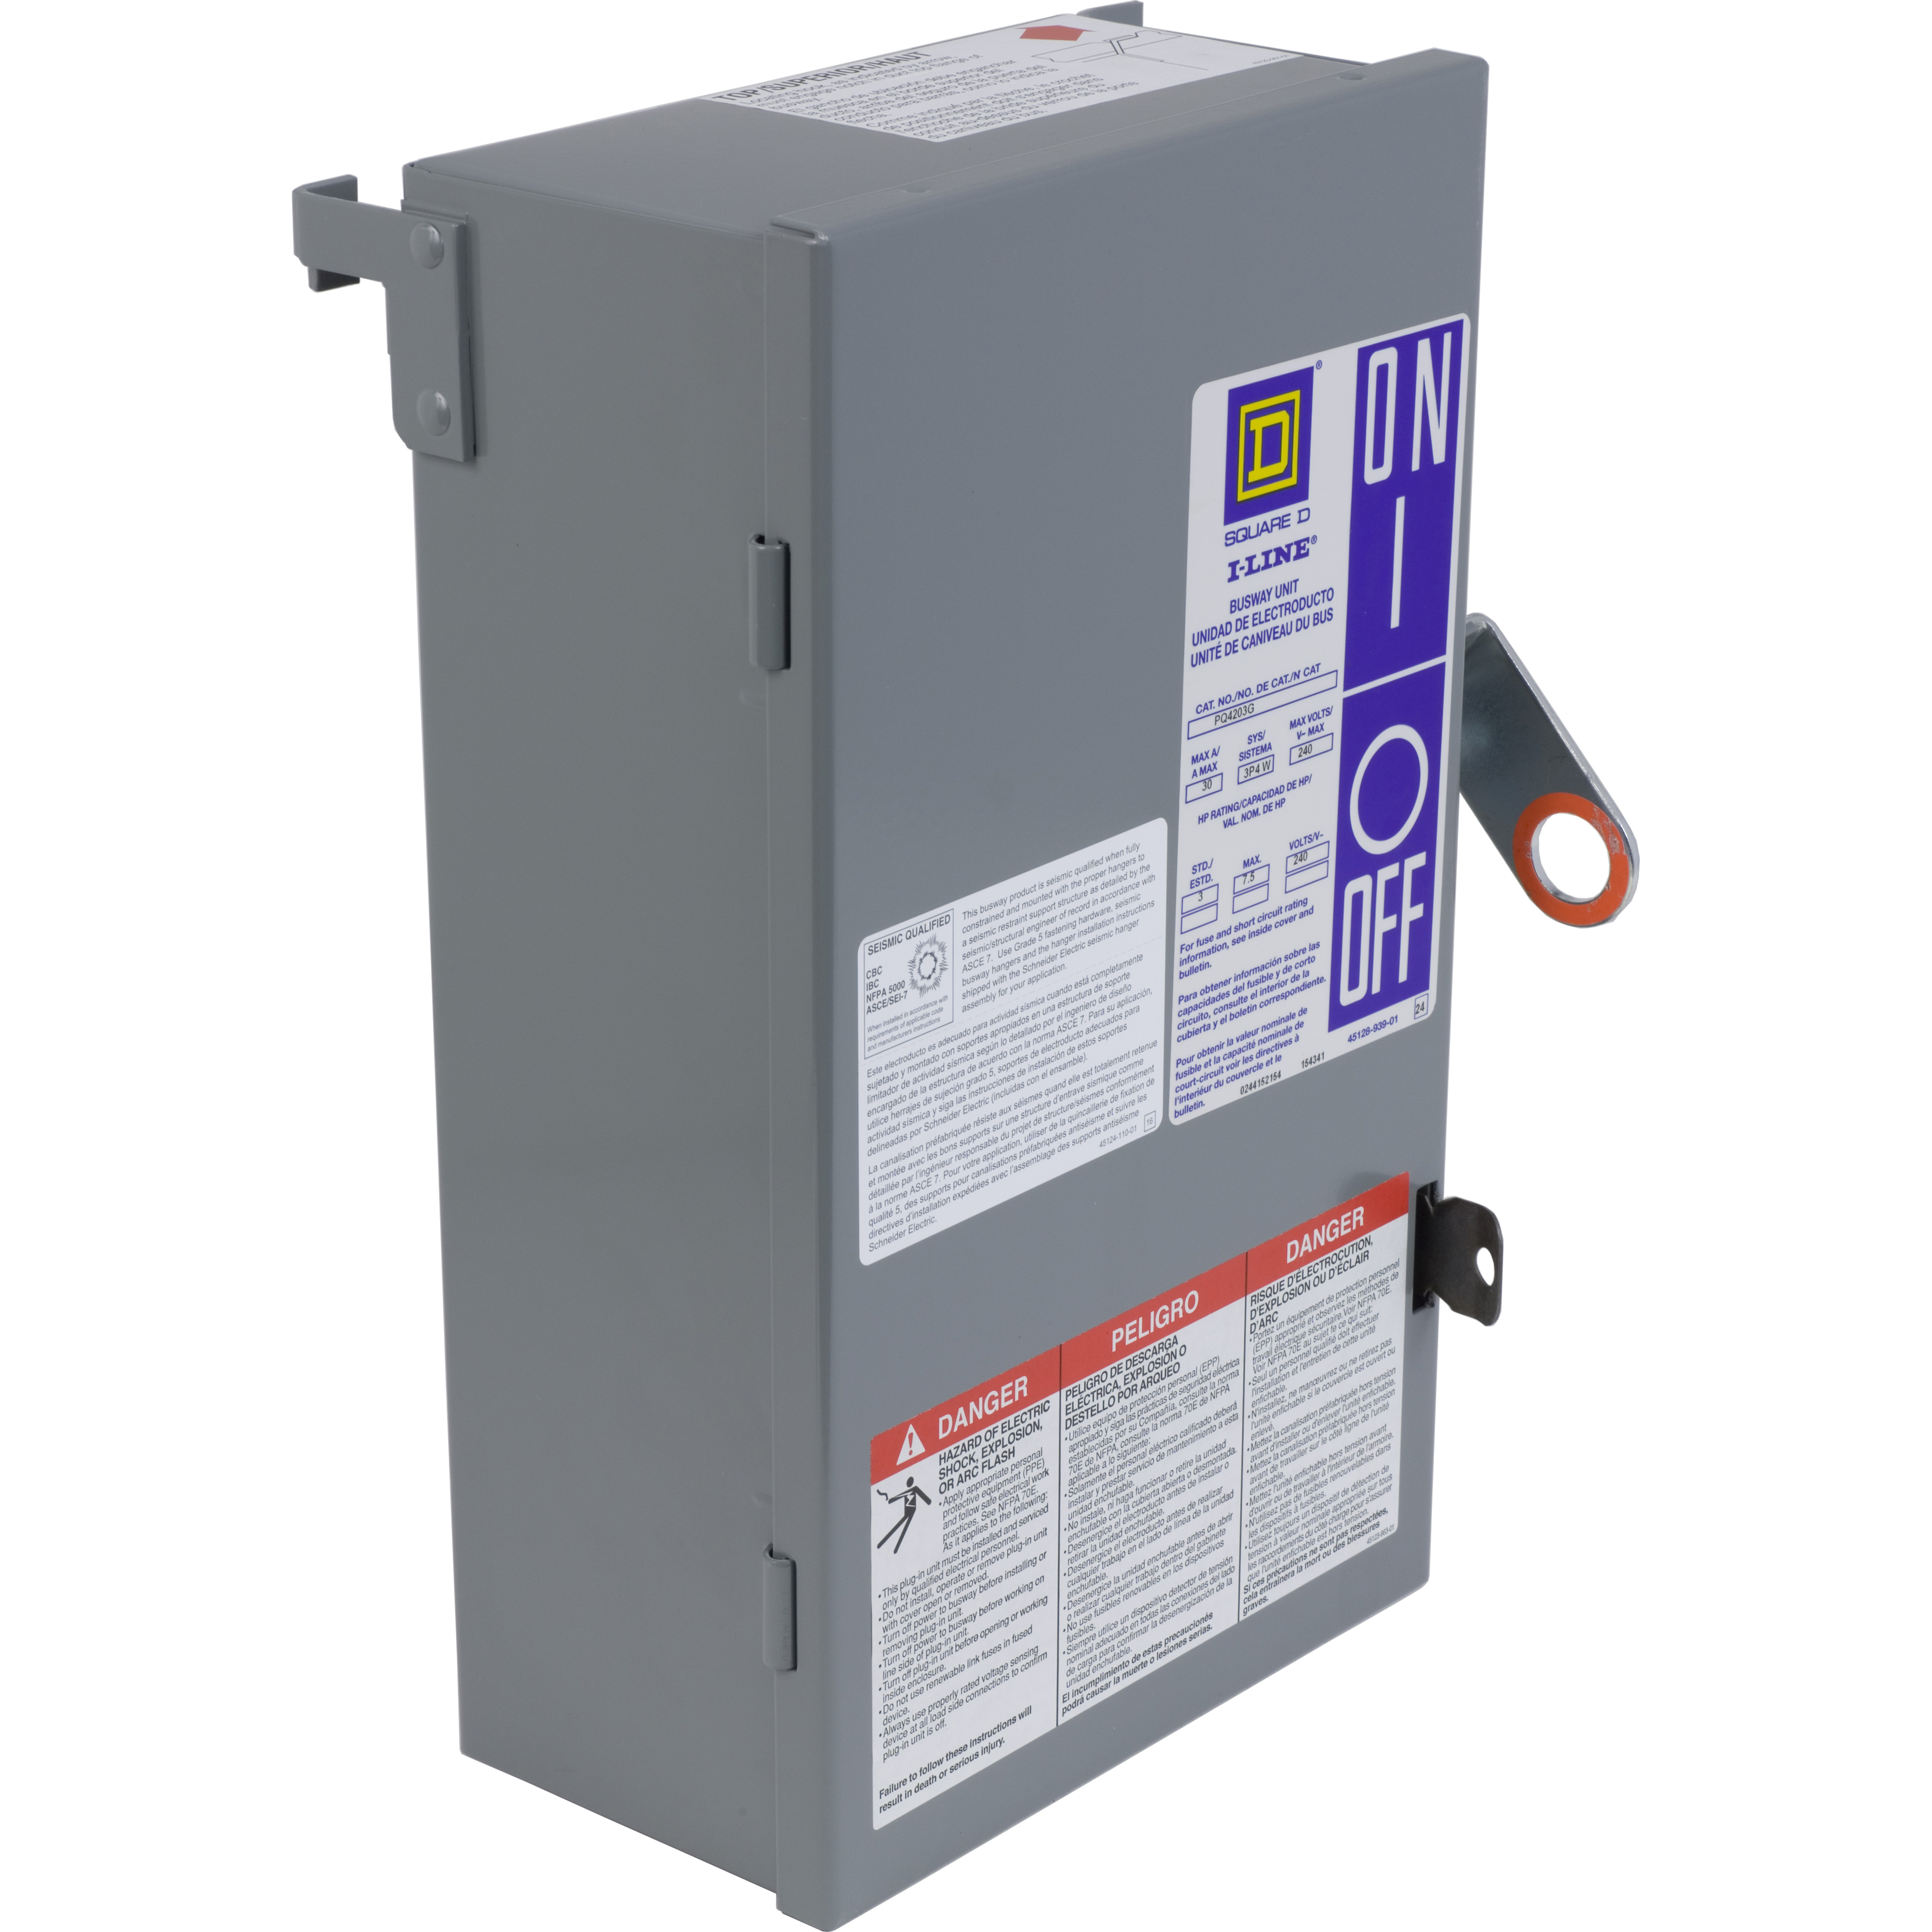 Plug-in unit, I-Line Busway, fusible, 100A, 240VAC, 3 pole, 3 fuse + G, plug in connection, vertical riser only